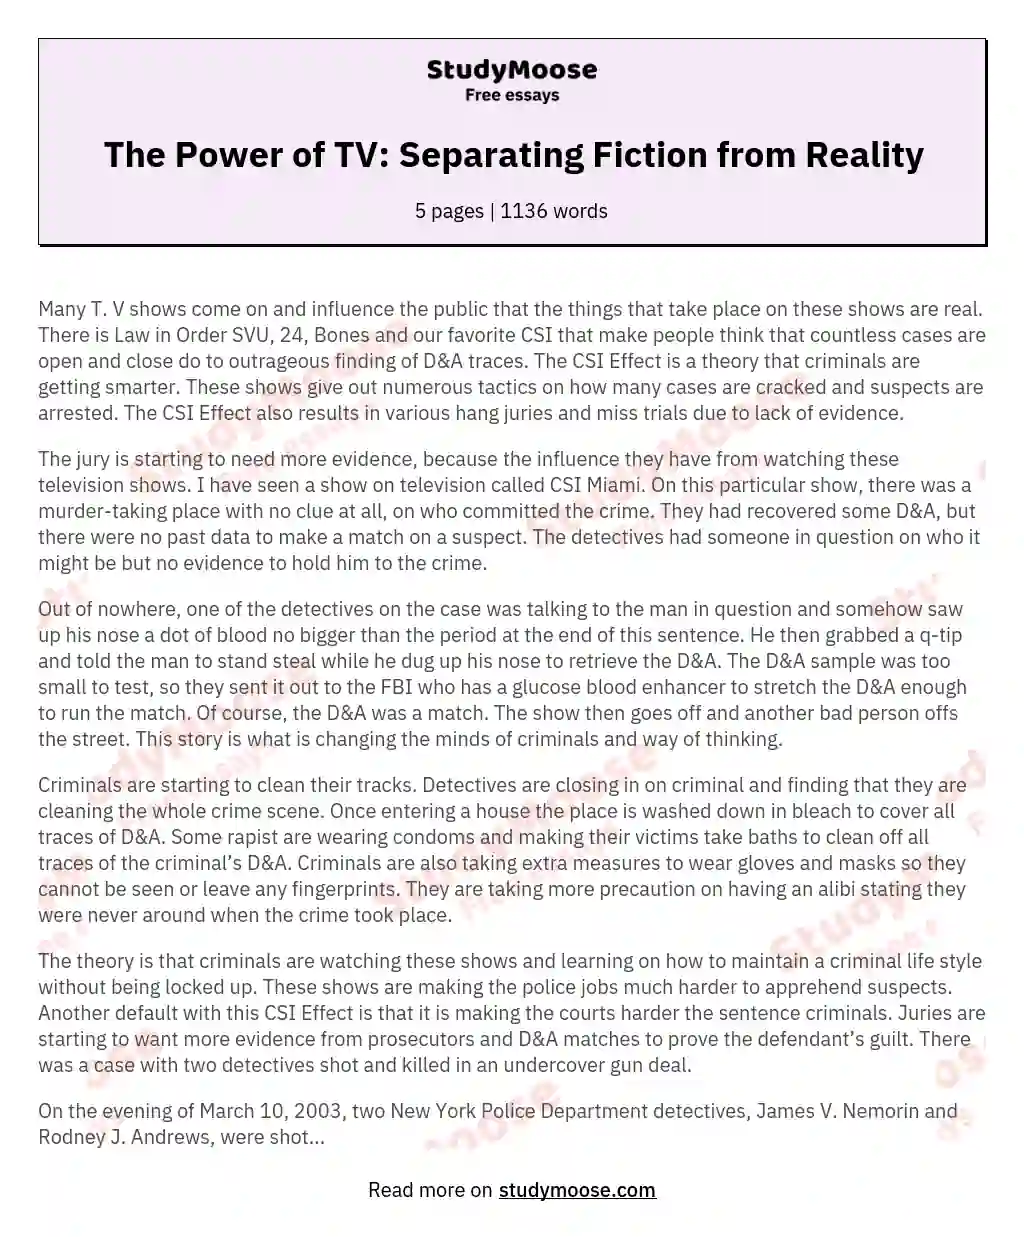 The Power of TV: Separating Fiction from Reality essay